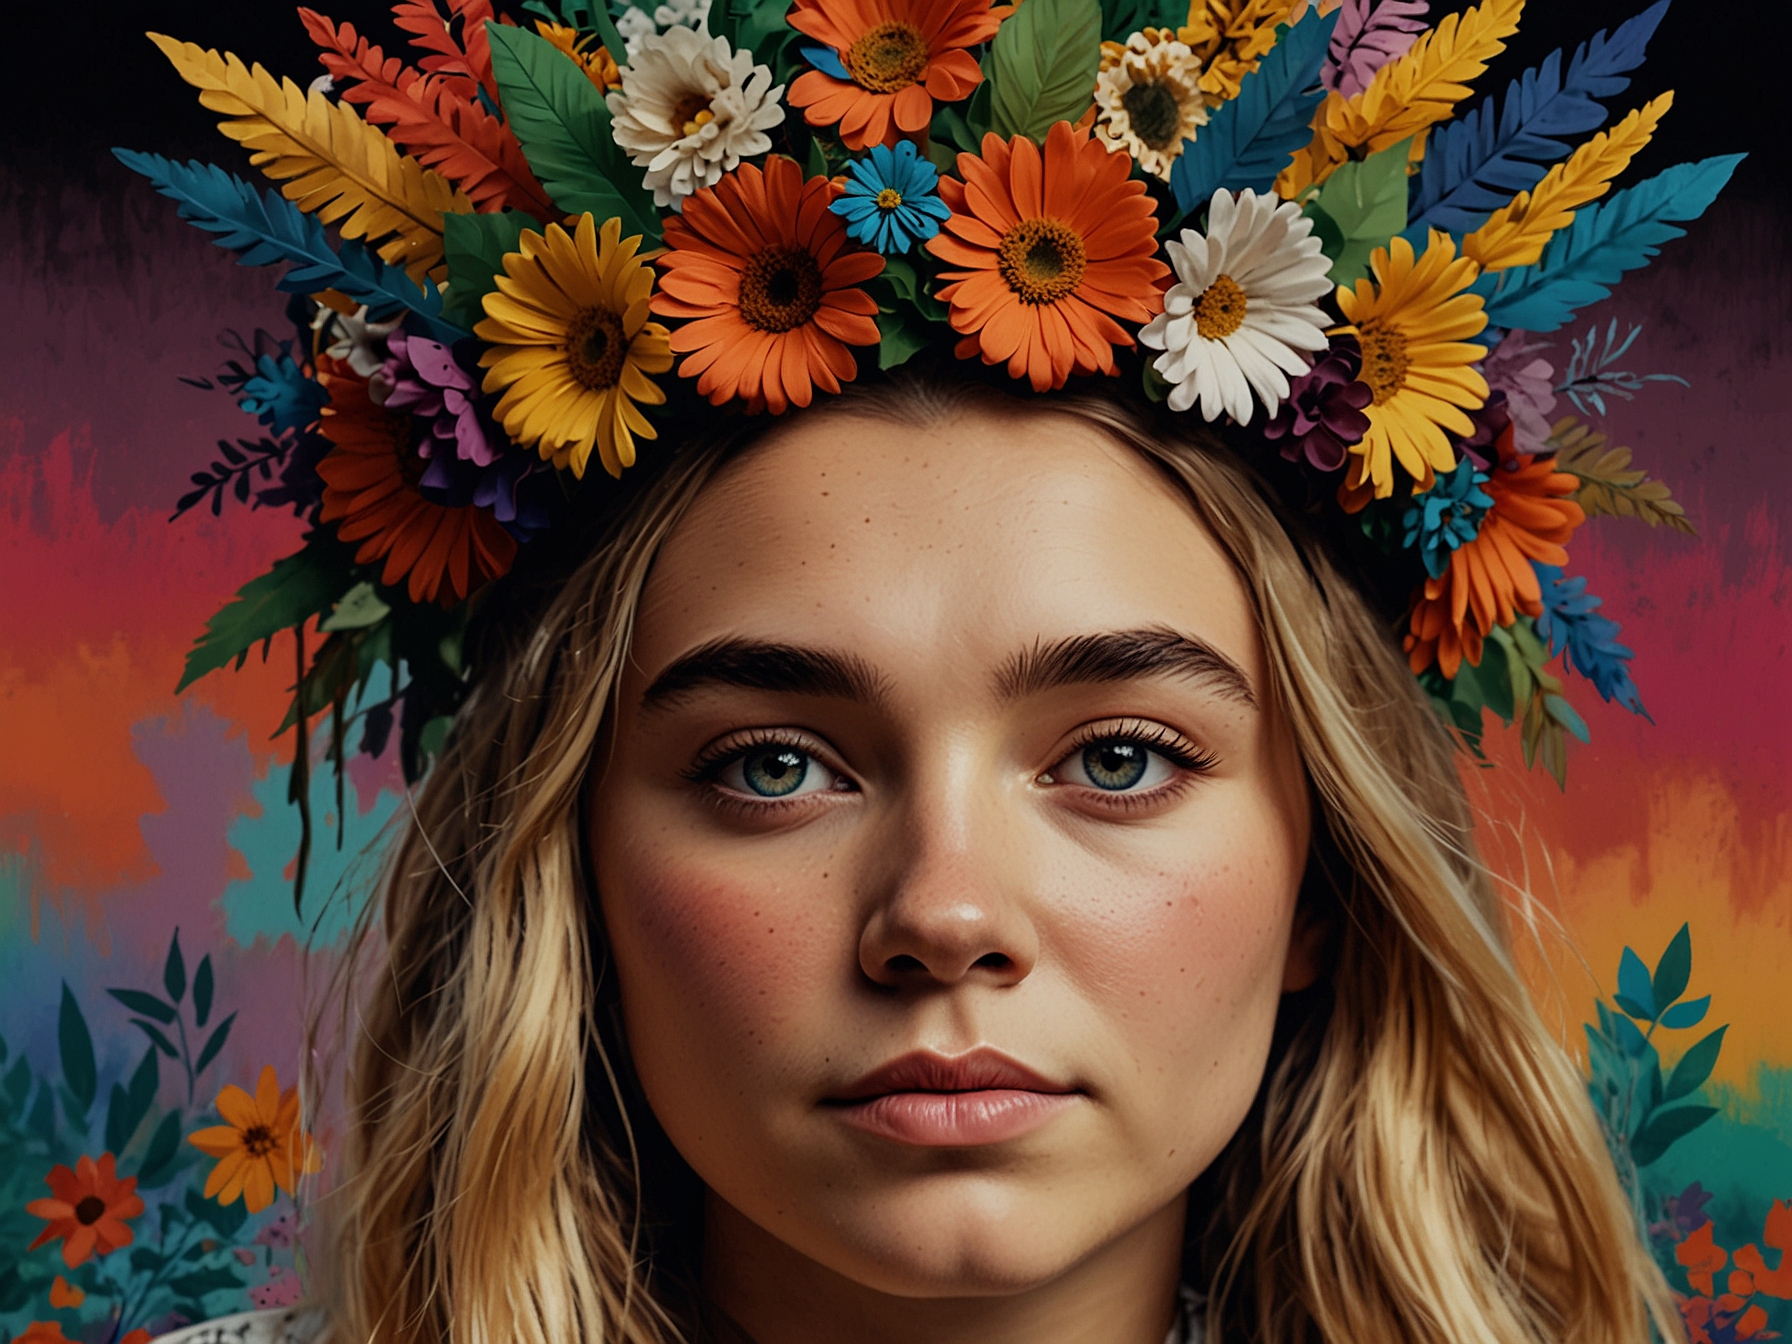 Close-up of Florence Pugh's colorful flower crown during her Glastonbury Festival appearance. The vivid hues of the crown evoke memories of her iconic role in the 2019 horror film 'Midsommar.'